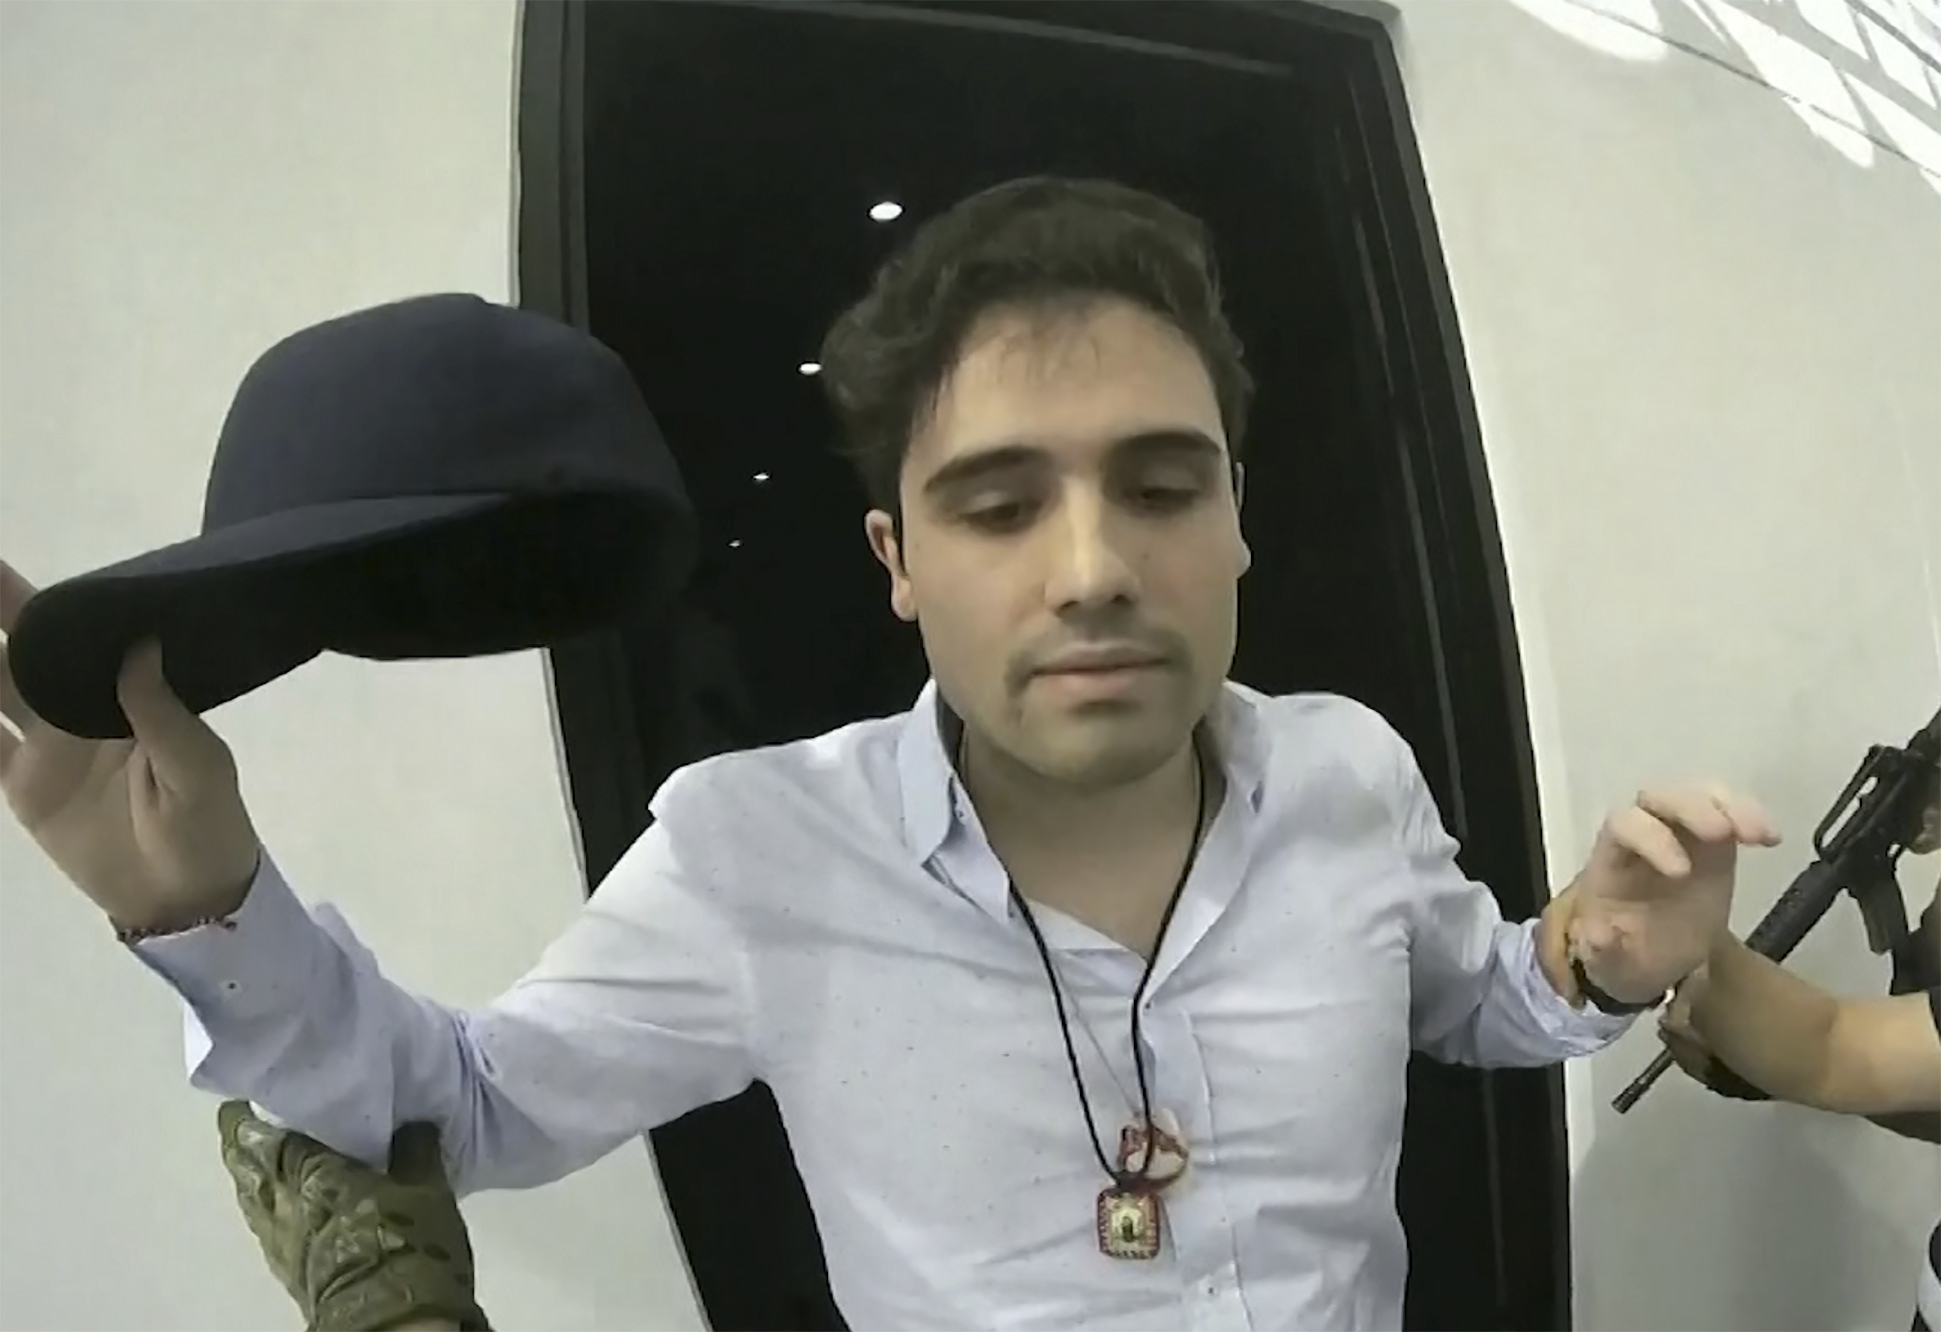   On October 17, 2019, a video fragment provided by the Mexican government shows Ovidio Guzmán López at the moment of his arrest, in Culiacán, Mexico.  Mexican security forces were forced to release the son of Sinaloa cartel leader Joaquín "El Chapo" Guzmán that day after a shooting in the western city of Culiacán.  (CEPROPIE via AP File)